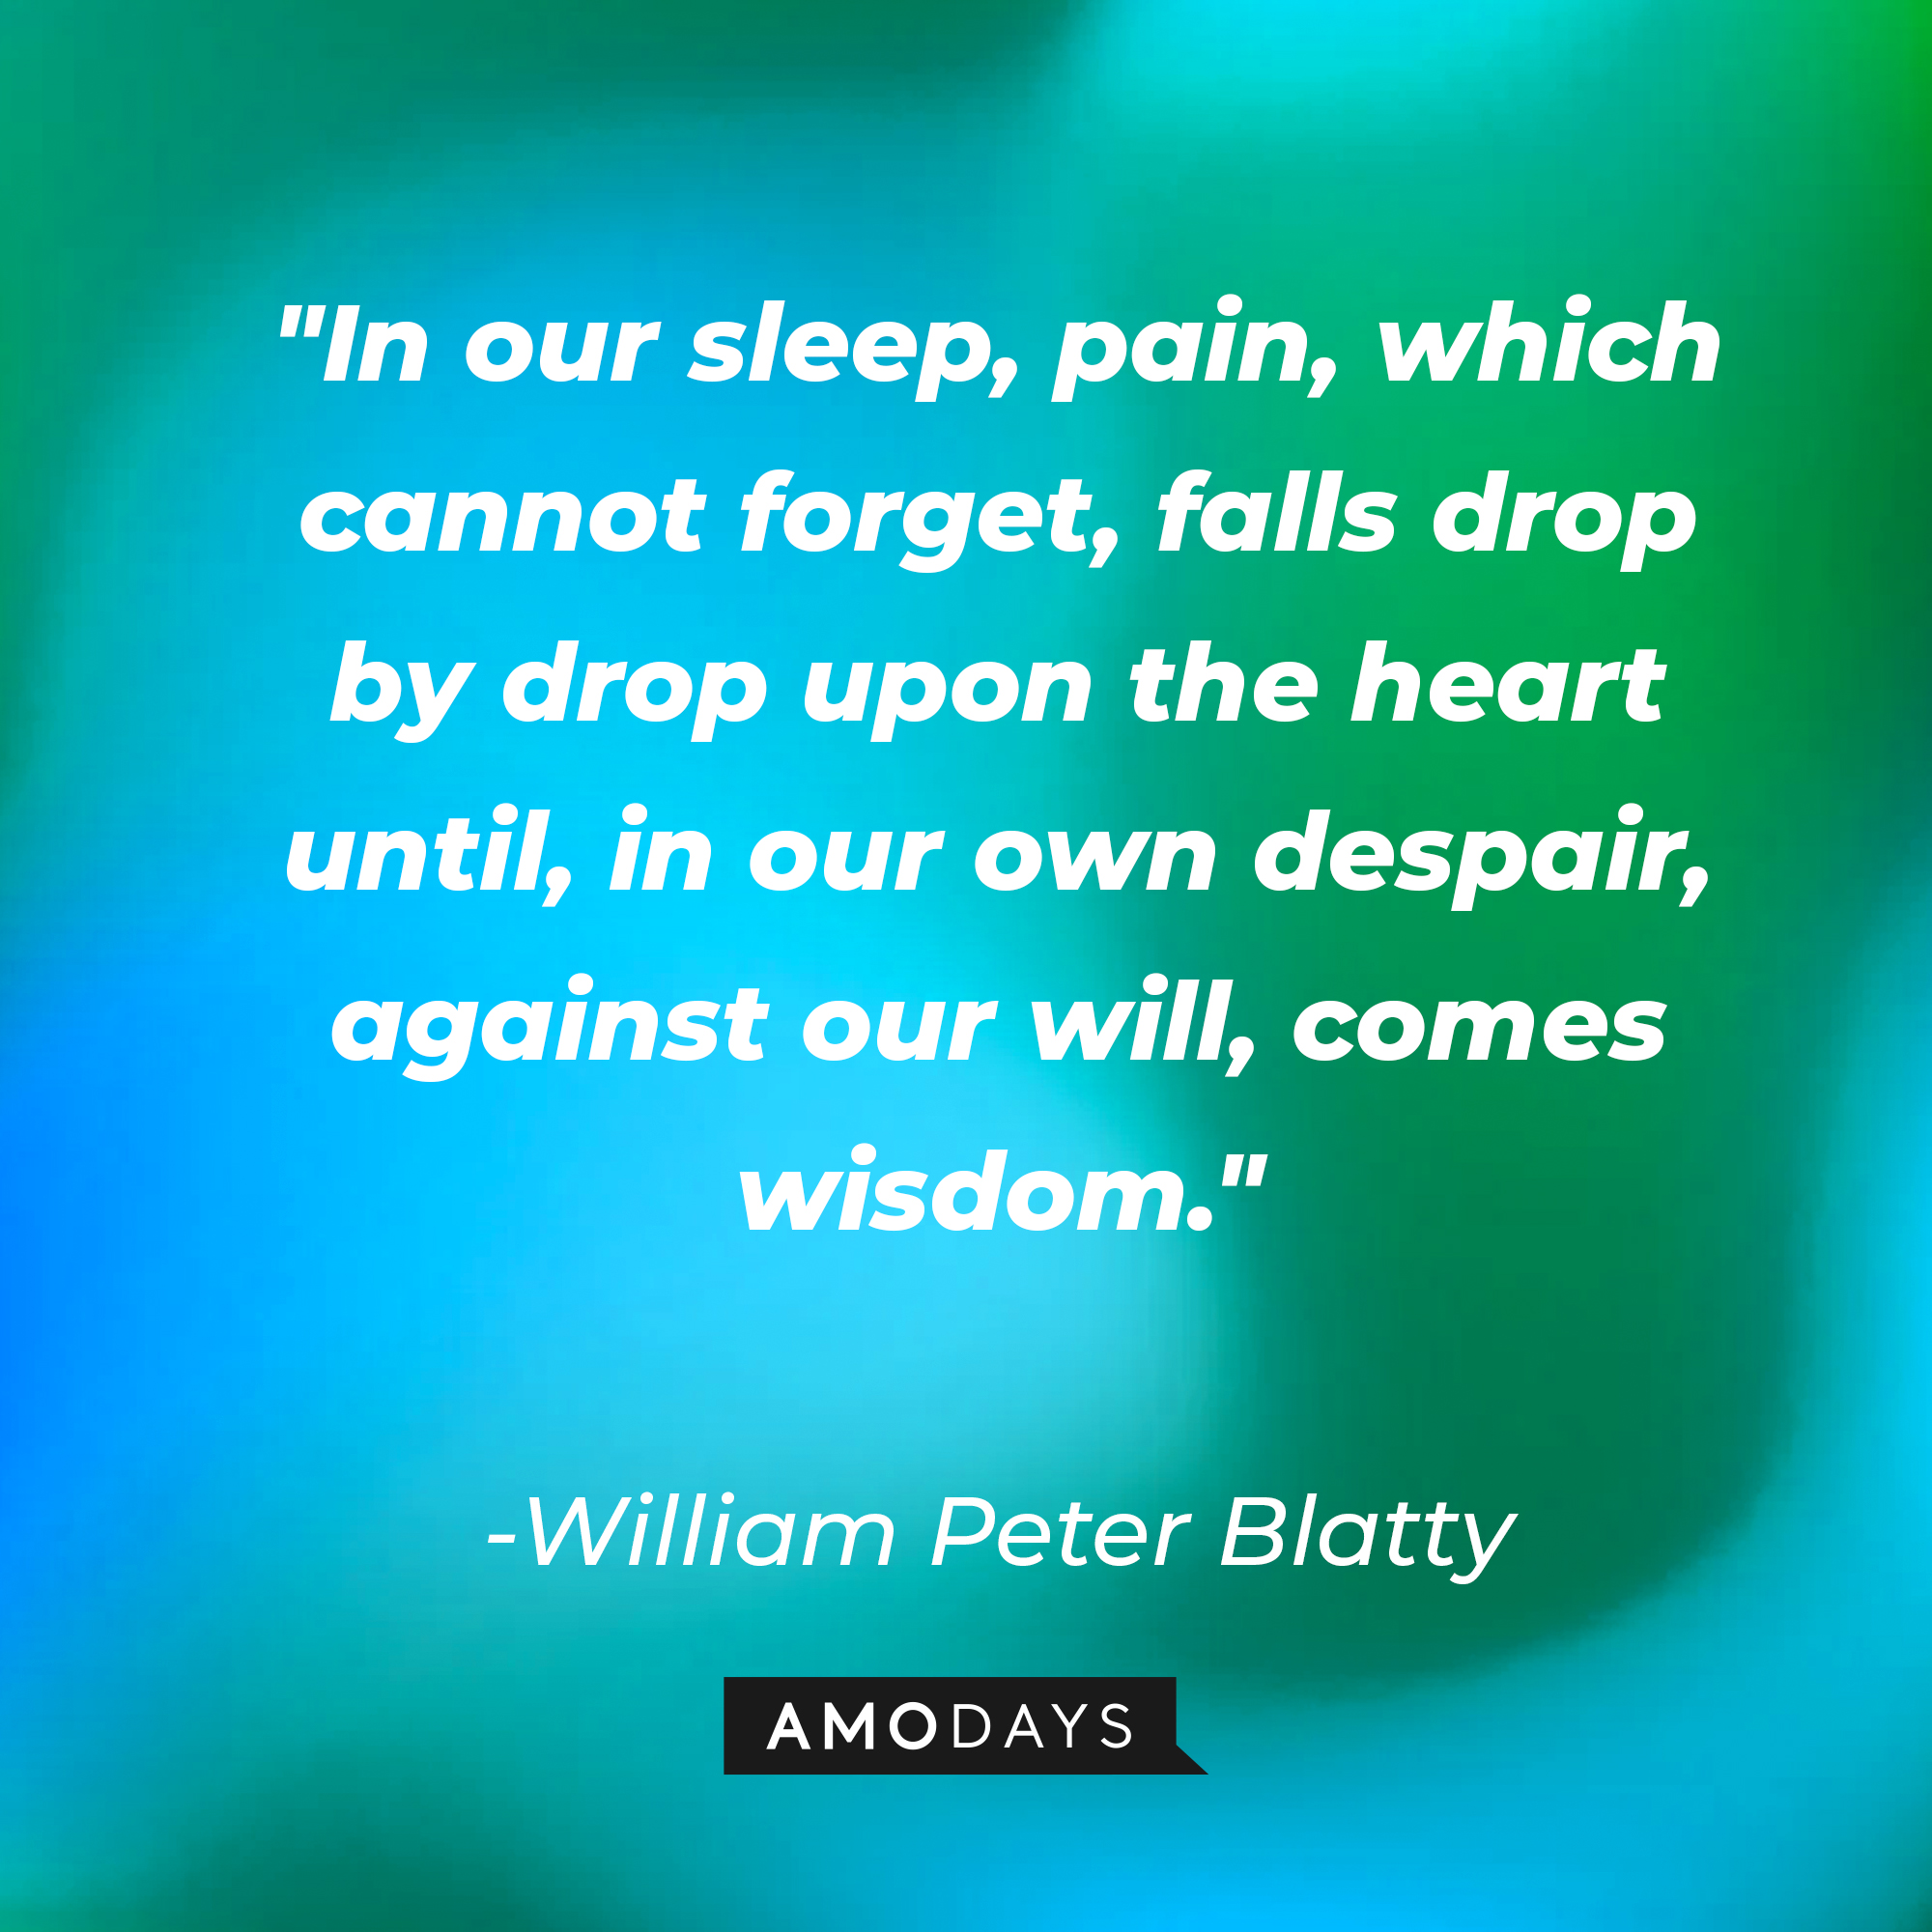 William Peter Blatty's quote: "In our sleep, pain, which cannot forget, falls drop by drop upon the heart until, in our own despair, against our will, comes wisdom." | Source: AmoDays